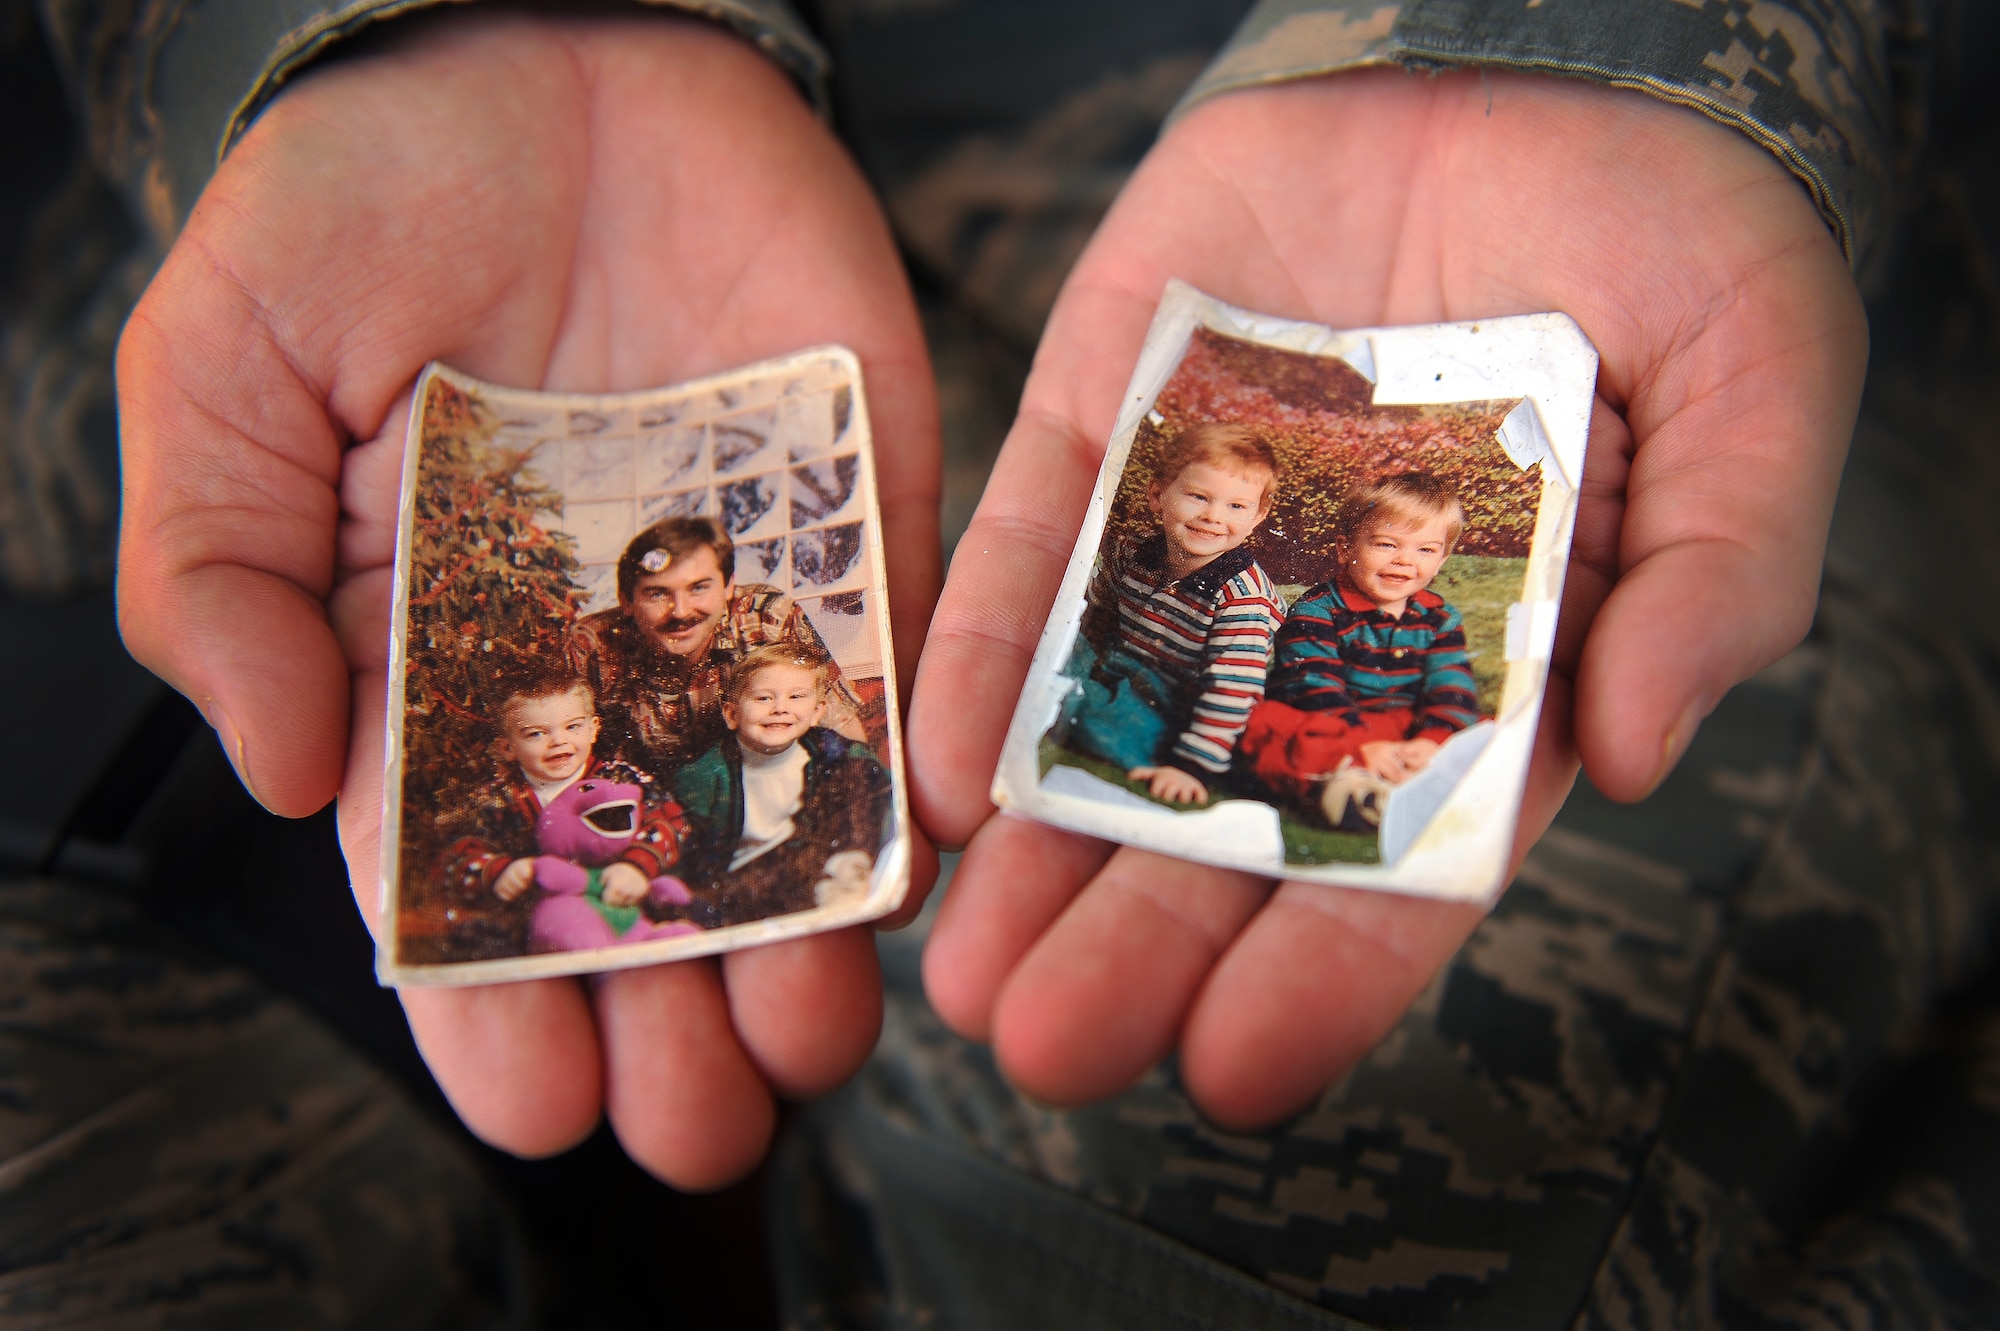 Staff Sgt. Ronald Ball displays photos of his sons that he keeps in his wallet June 25, 2014, at an undisclosed location in Southwest Asia. The photos were taken just before the murder of his wife in 1995. (U.S. Air Force photo/Tech. Sgt. Russ Scalf)